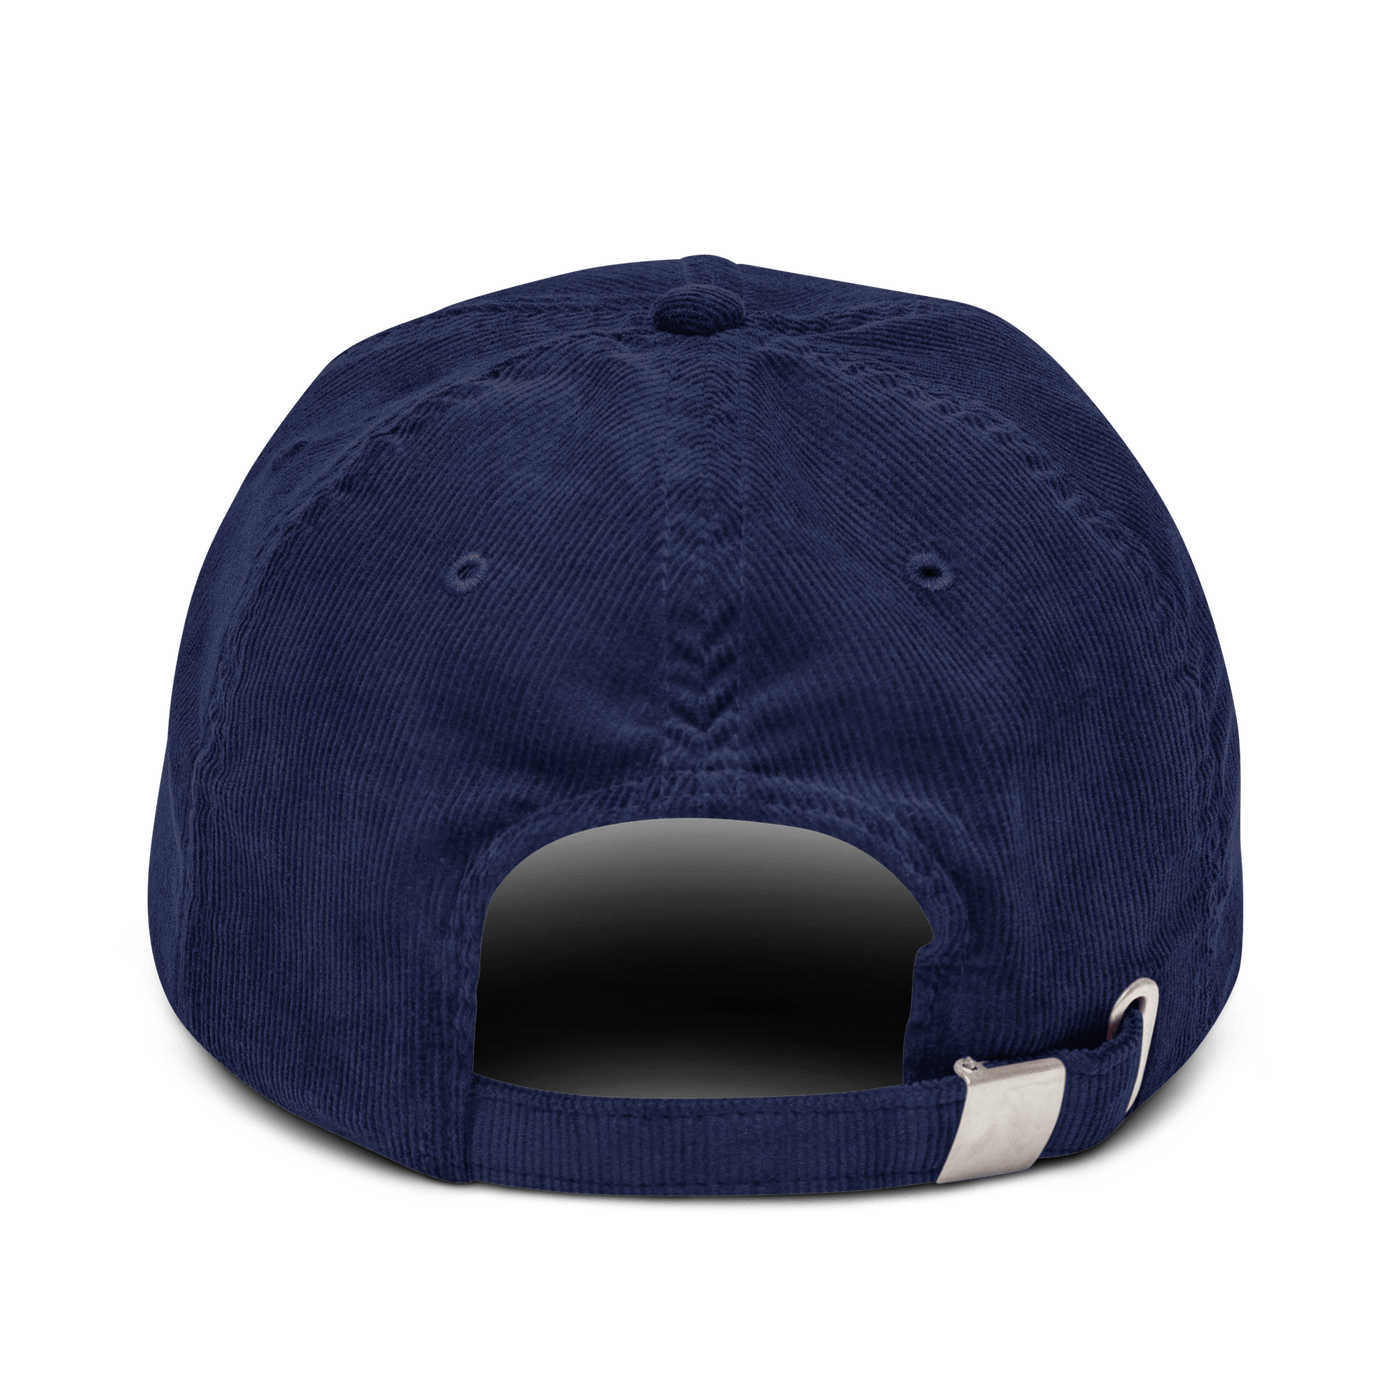 Future Milf Corduroy hat - Oxford Navy - - Just Another Cap Store